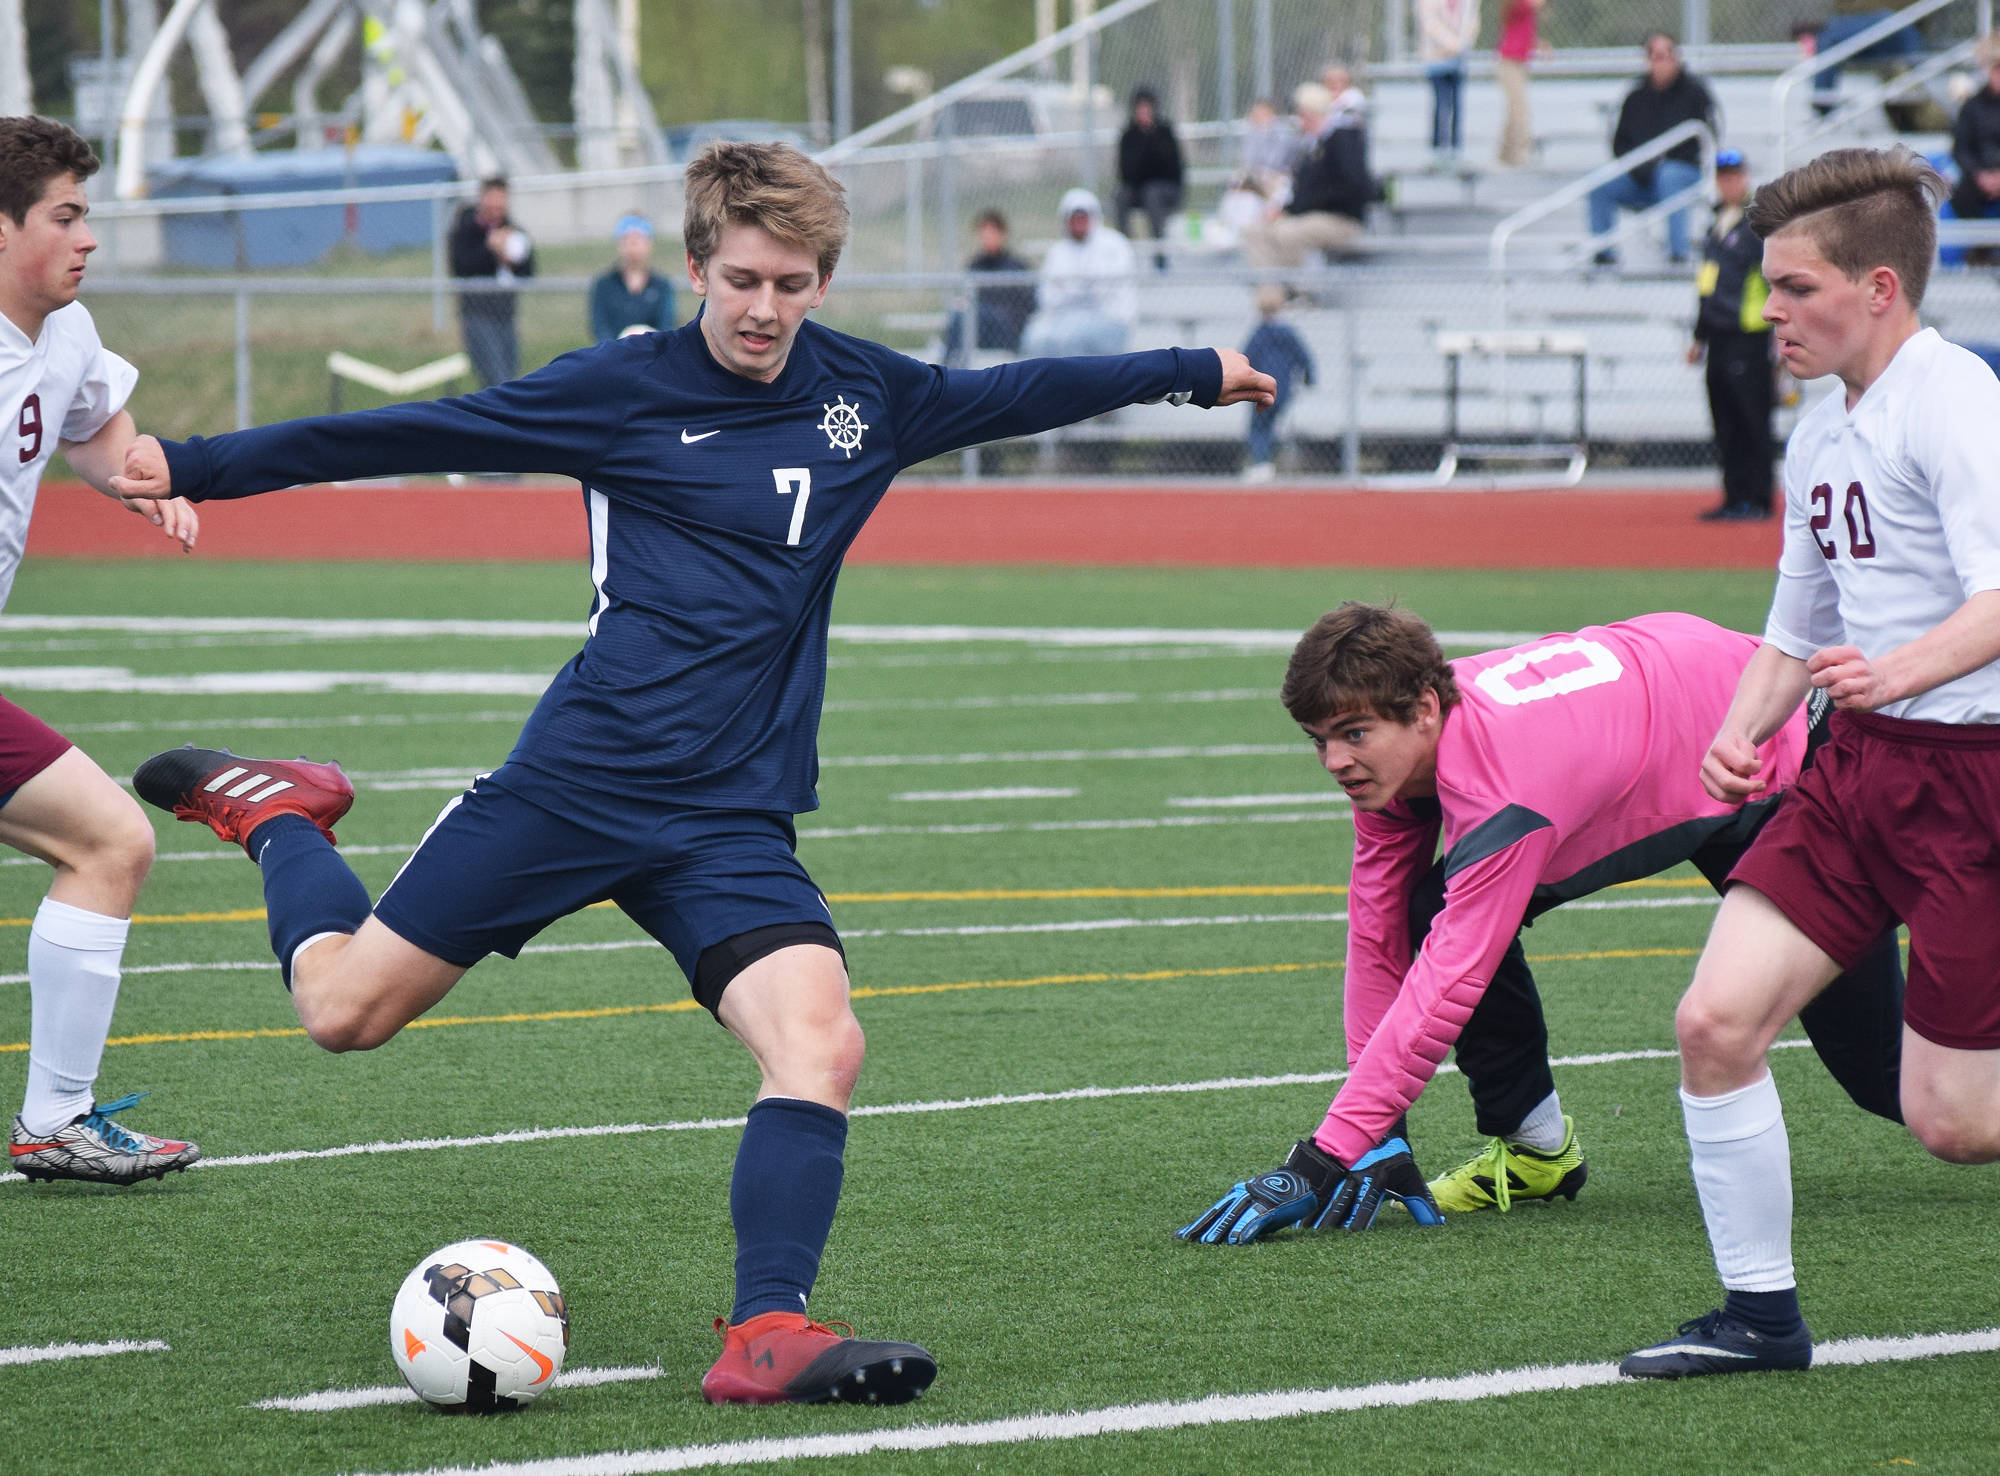 Homer’s Simon Dye (7) winds up for a goal scoring kick Thursday against Grace Christian in Division II soccer tournament play at Eagle River High School. (Photo by Joey Klecka/Peninsula Clarion)